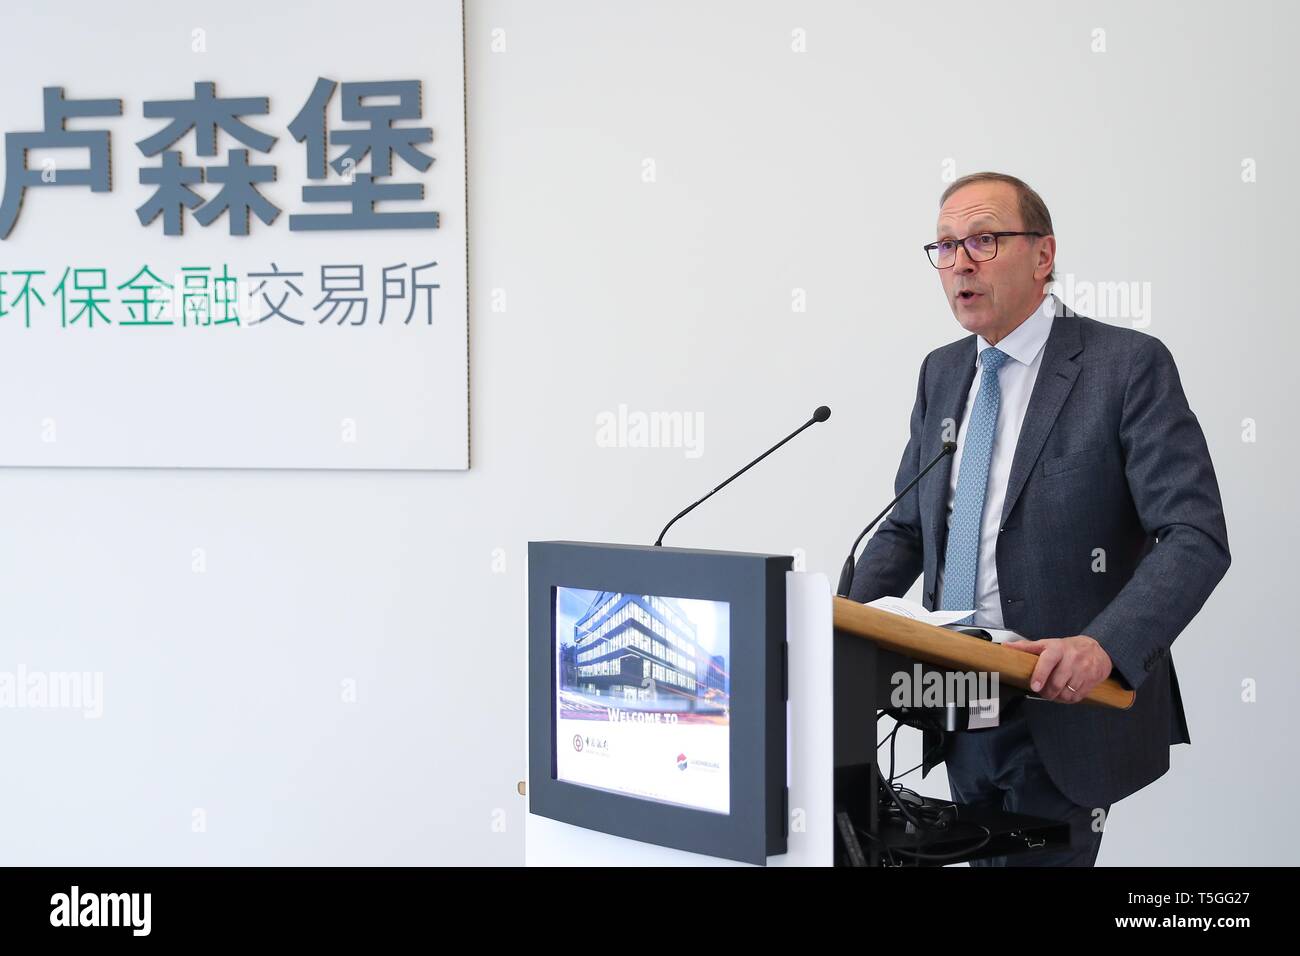 (190425) -- LUXEMBOURG, April 25, 2019 (Xinhua) -- Robert Scharfe, CEO of the Luxembourg Stock Exchange, speaks during an official Bell Ceremony at the Luxembourg Stock Exchange in Luxembourg, April 24, 2019. The Bank of China has chosen Luxembourg to list its 500-million-U.S.-dollar bond during an official ceremony on Wednesday at the Luxembourg Stock Exchange. The U.S.-dollar-denominated bond is the first Belt and Road-themed bond to be listed on Luxembourg Stock Exchange after Luxembourg signed a memorandum of understanding with China to cooperate on the Belt and Road Initiative in late Stock Photo